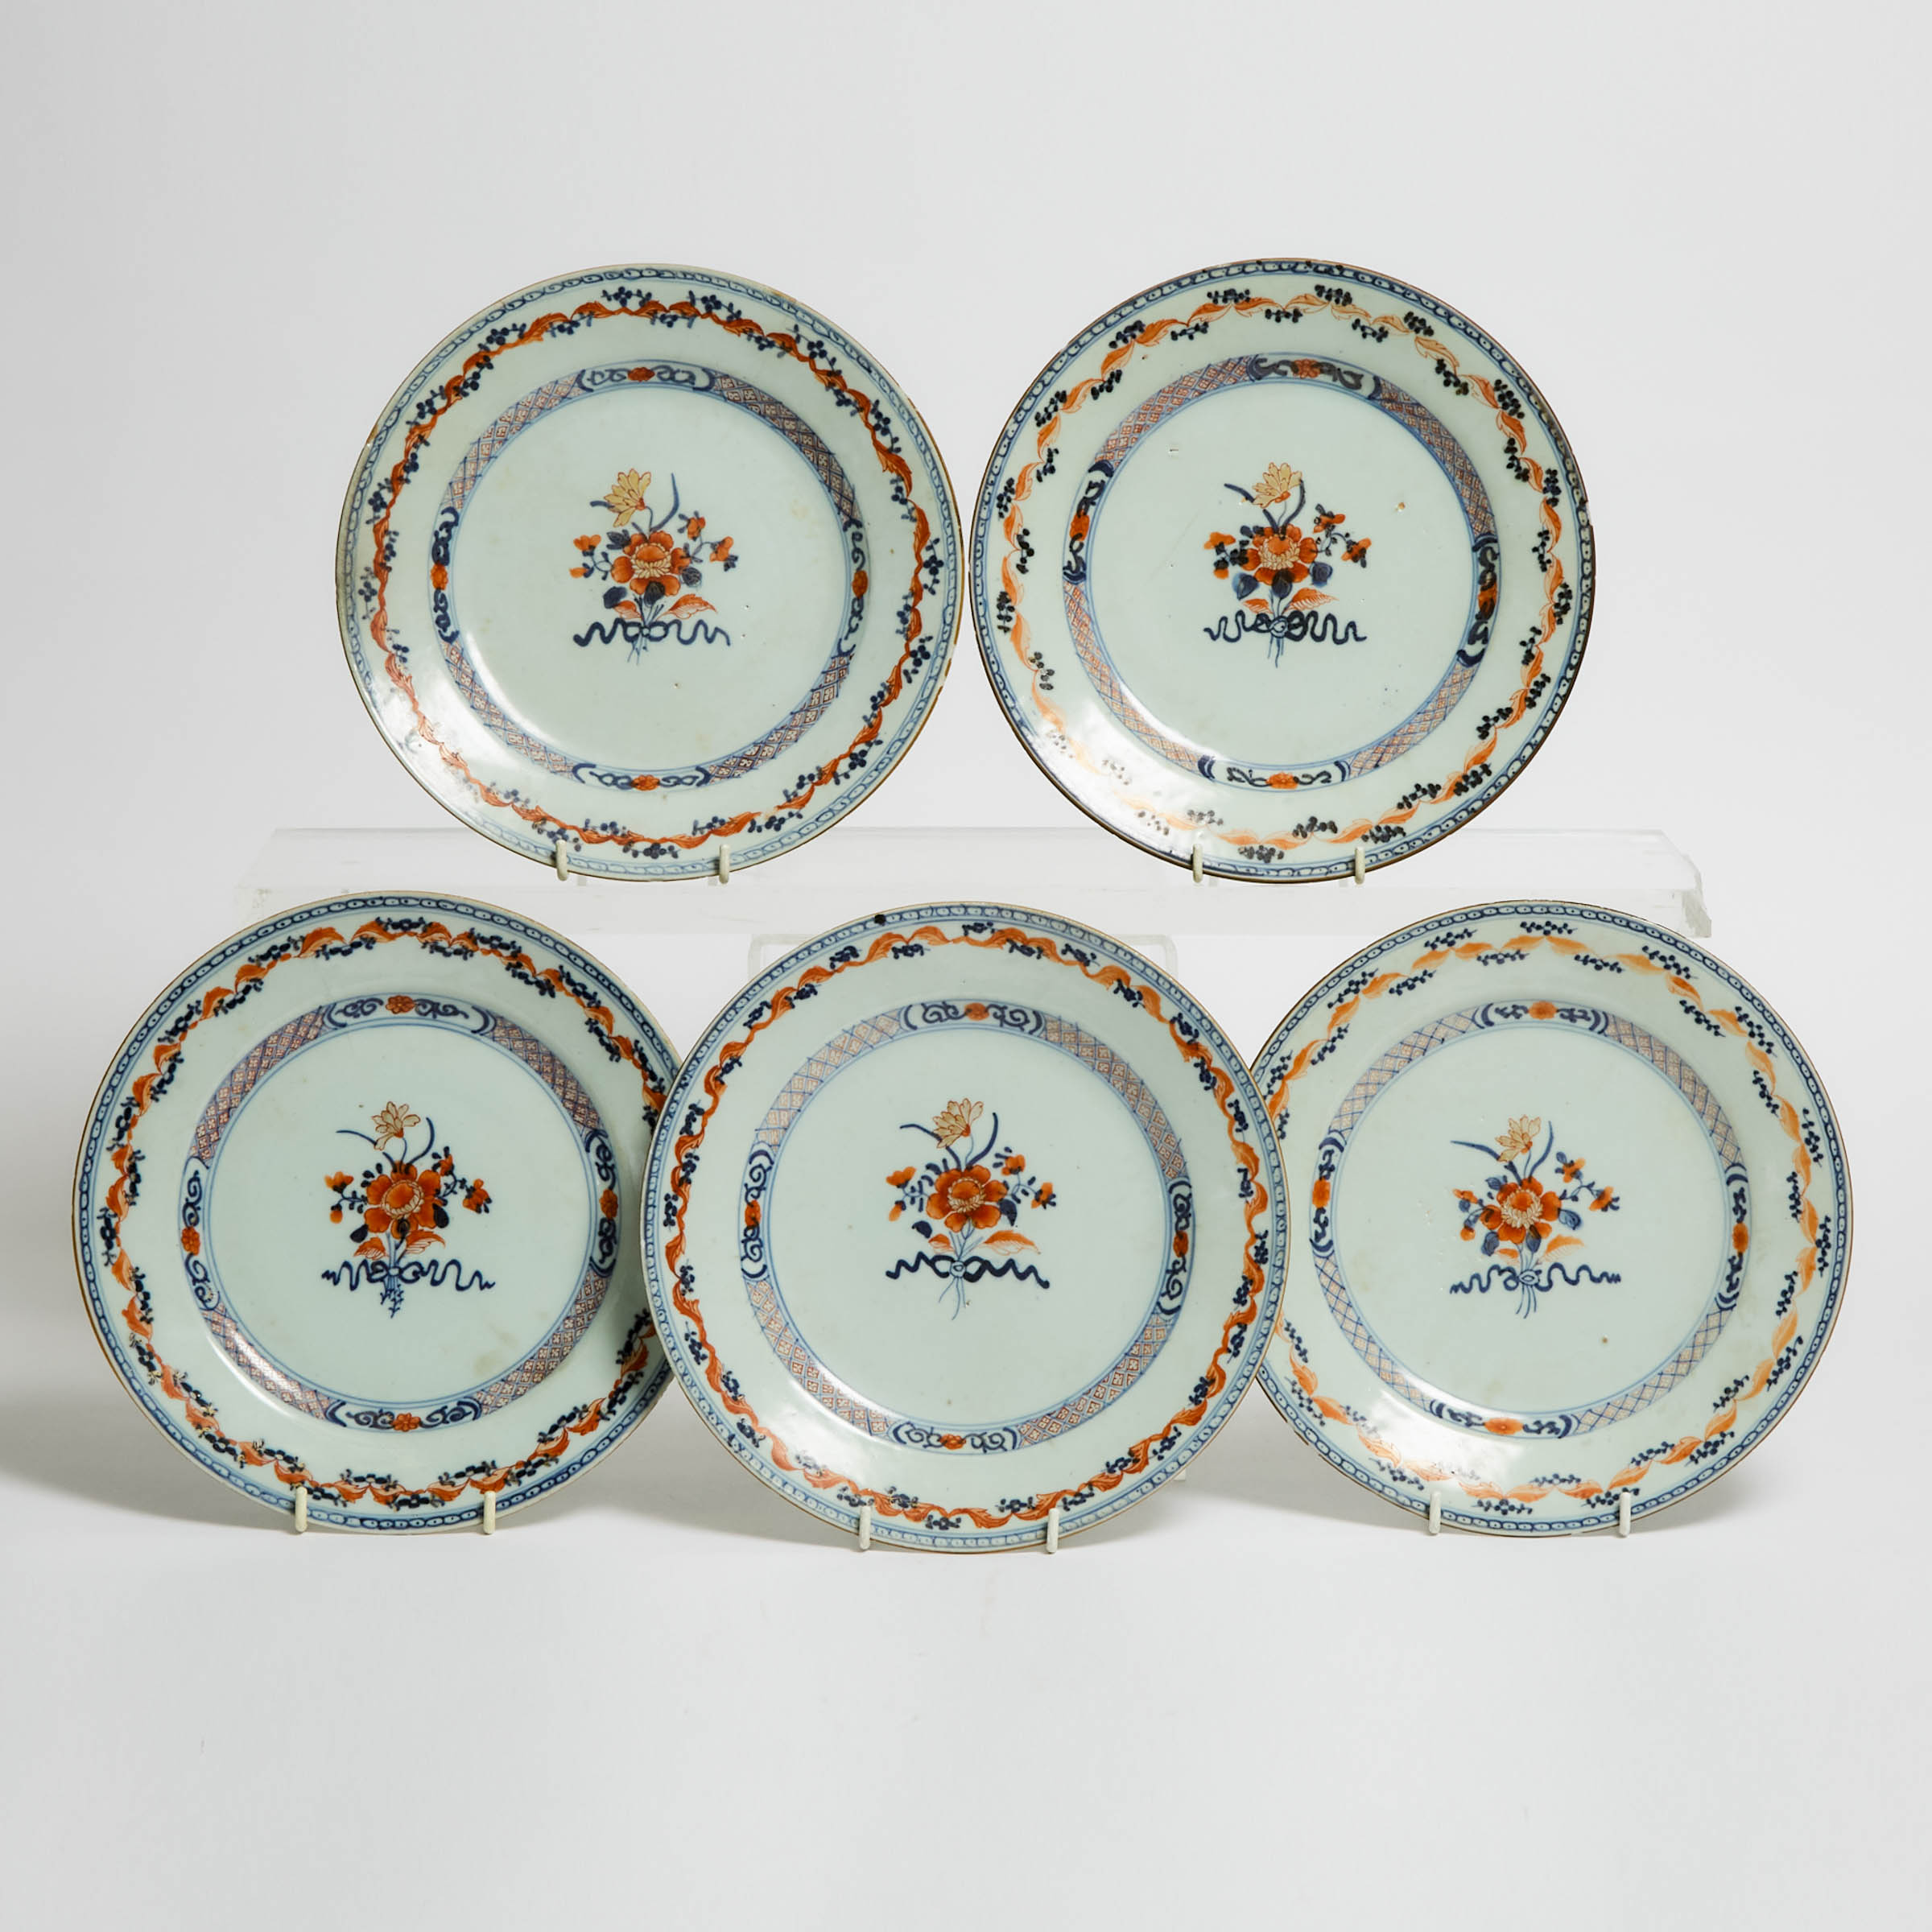 A Set of Five Chinese Imari Dishes  2f2c6d